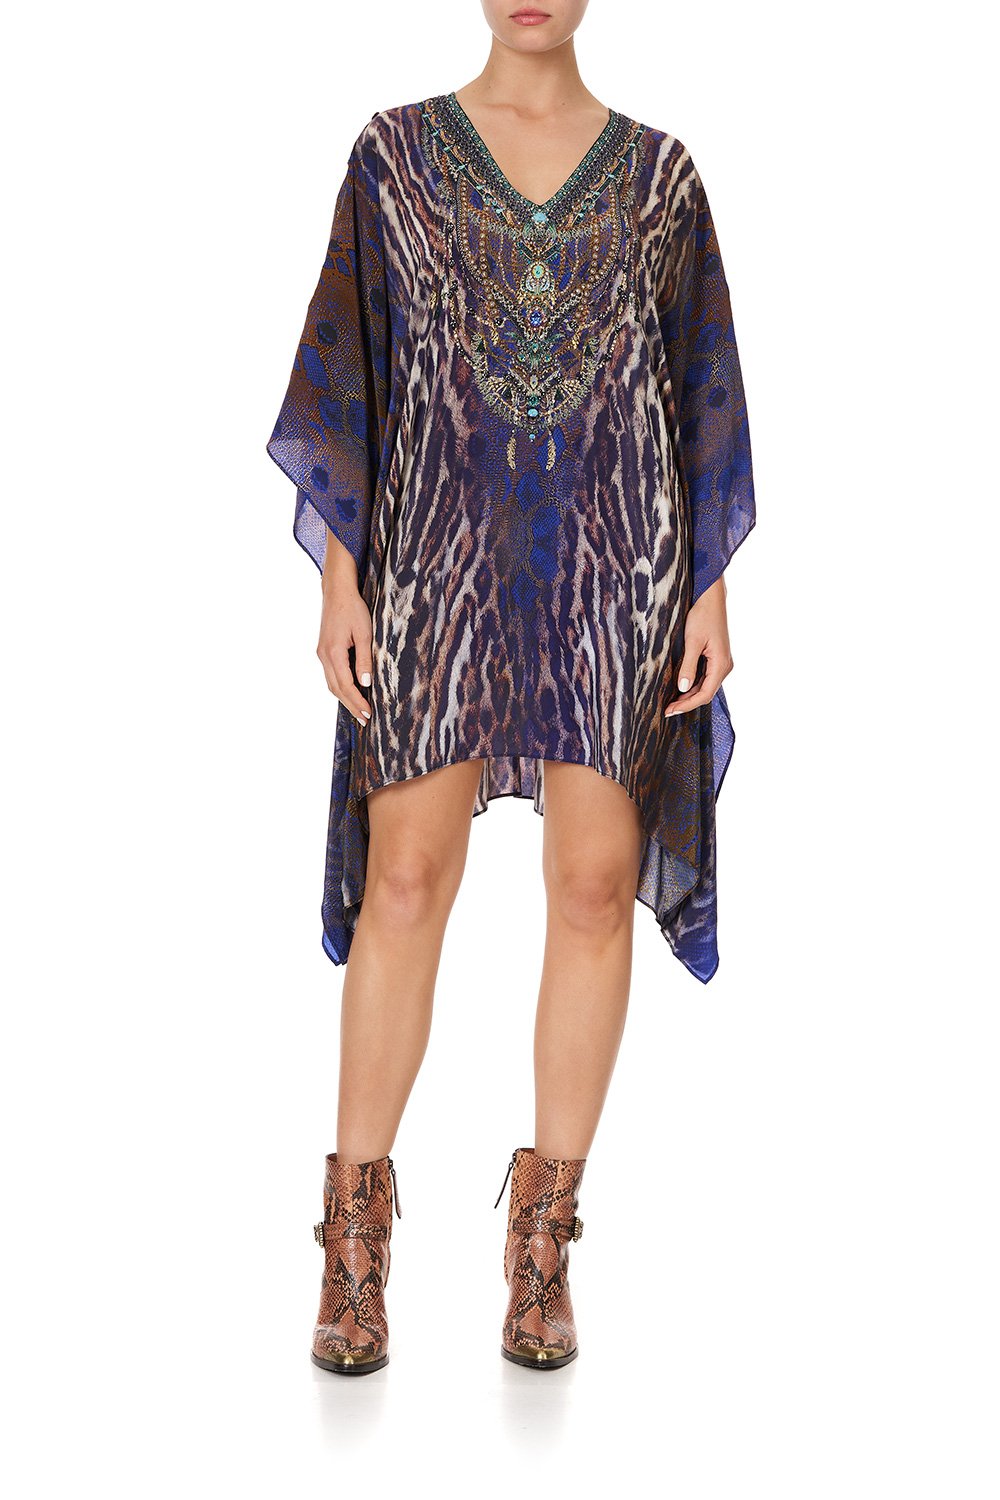 KAFTAN WITH BUTTON UP SLEEVES KOMODO QUEEN